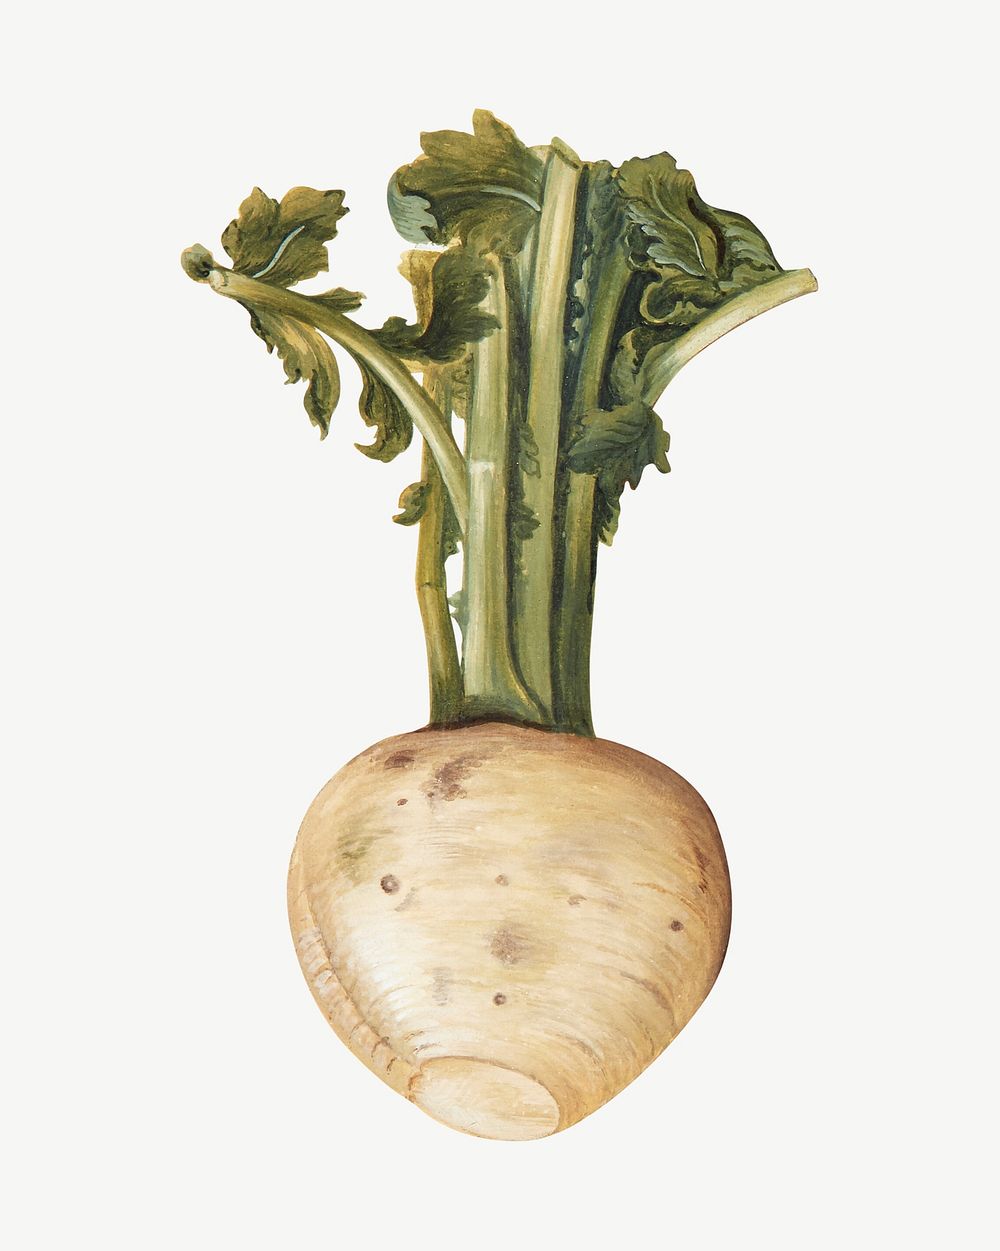 Turnip, vegetable illustration by Johanna Fosie psd.  Remixed by rawpixel. 